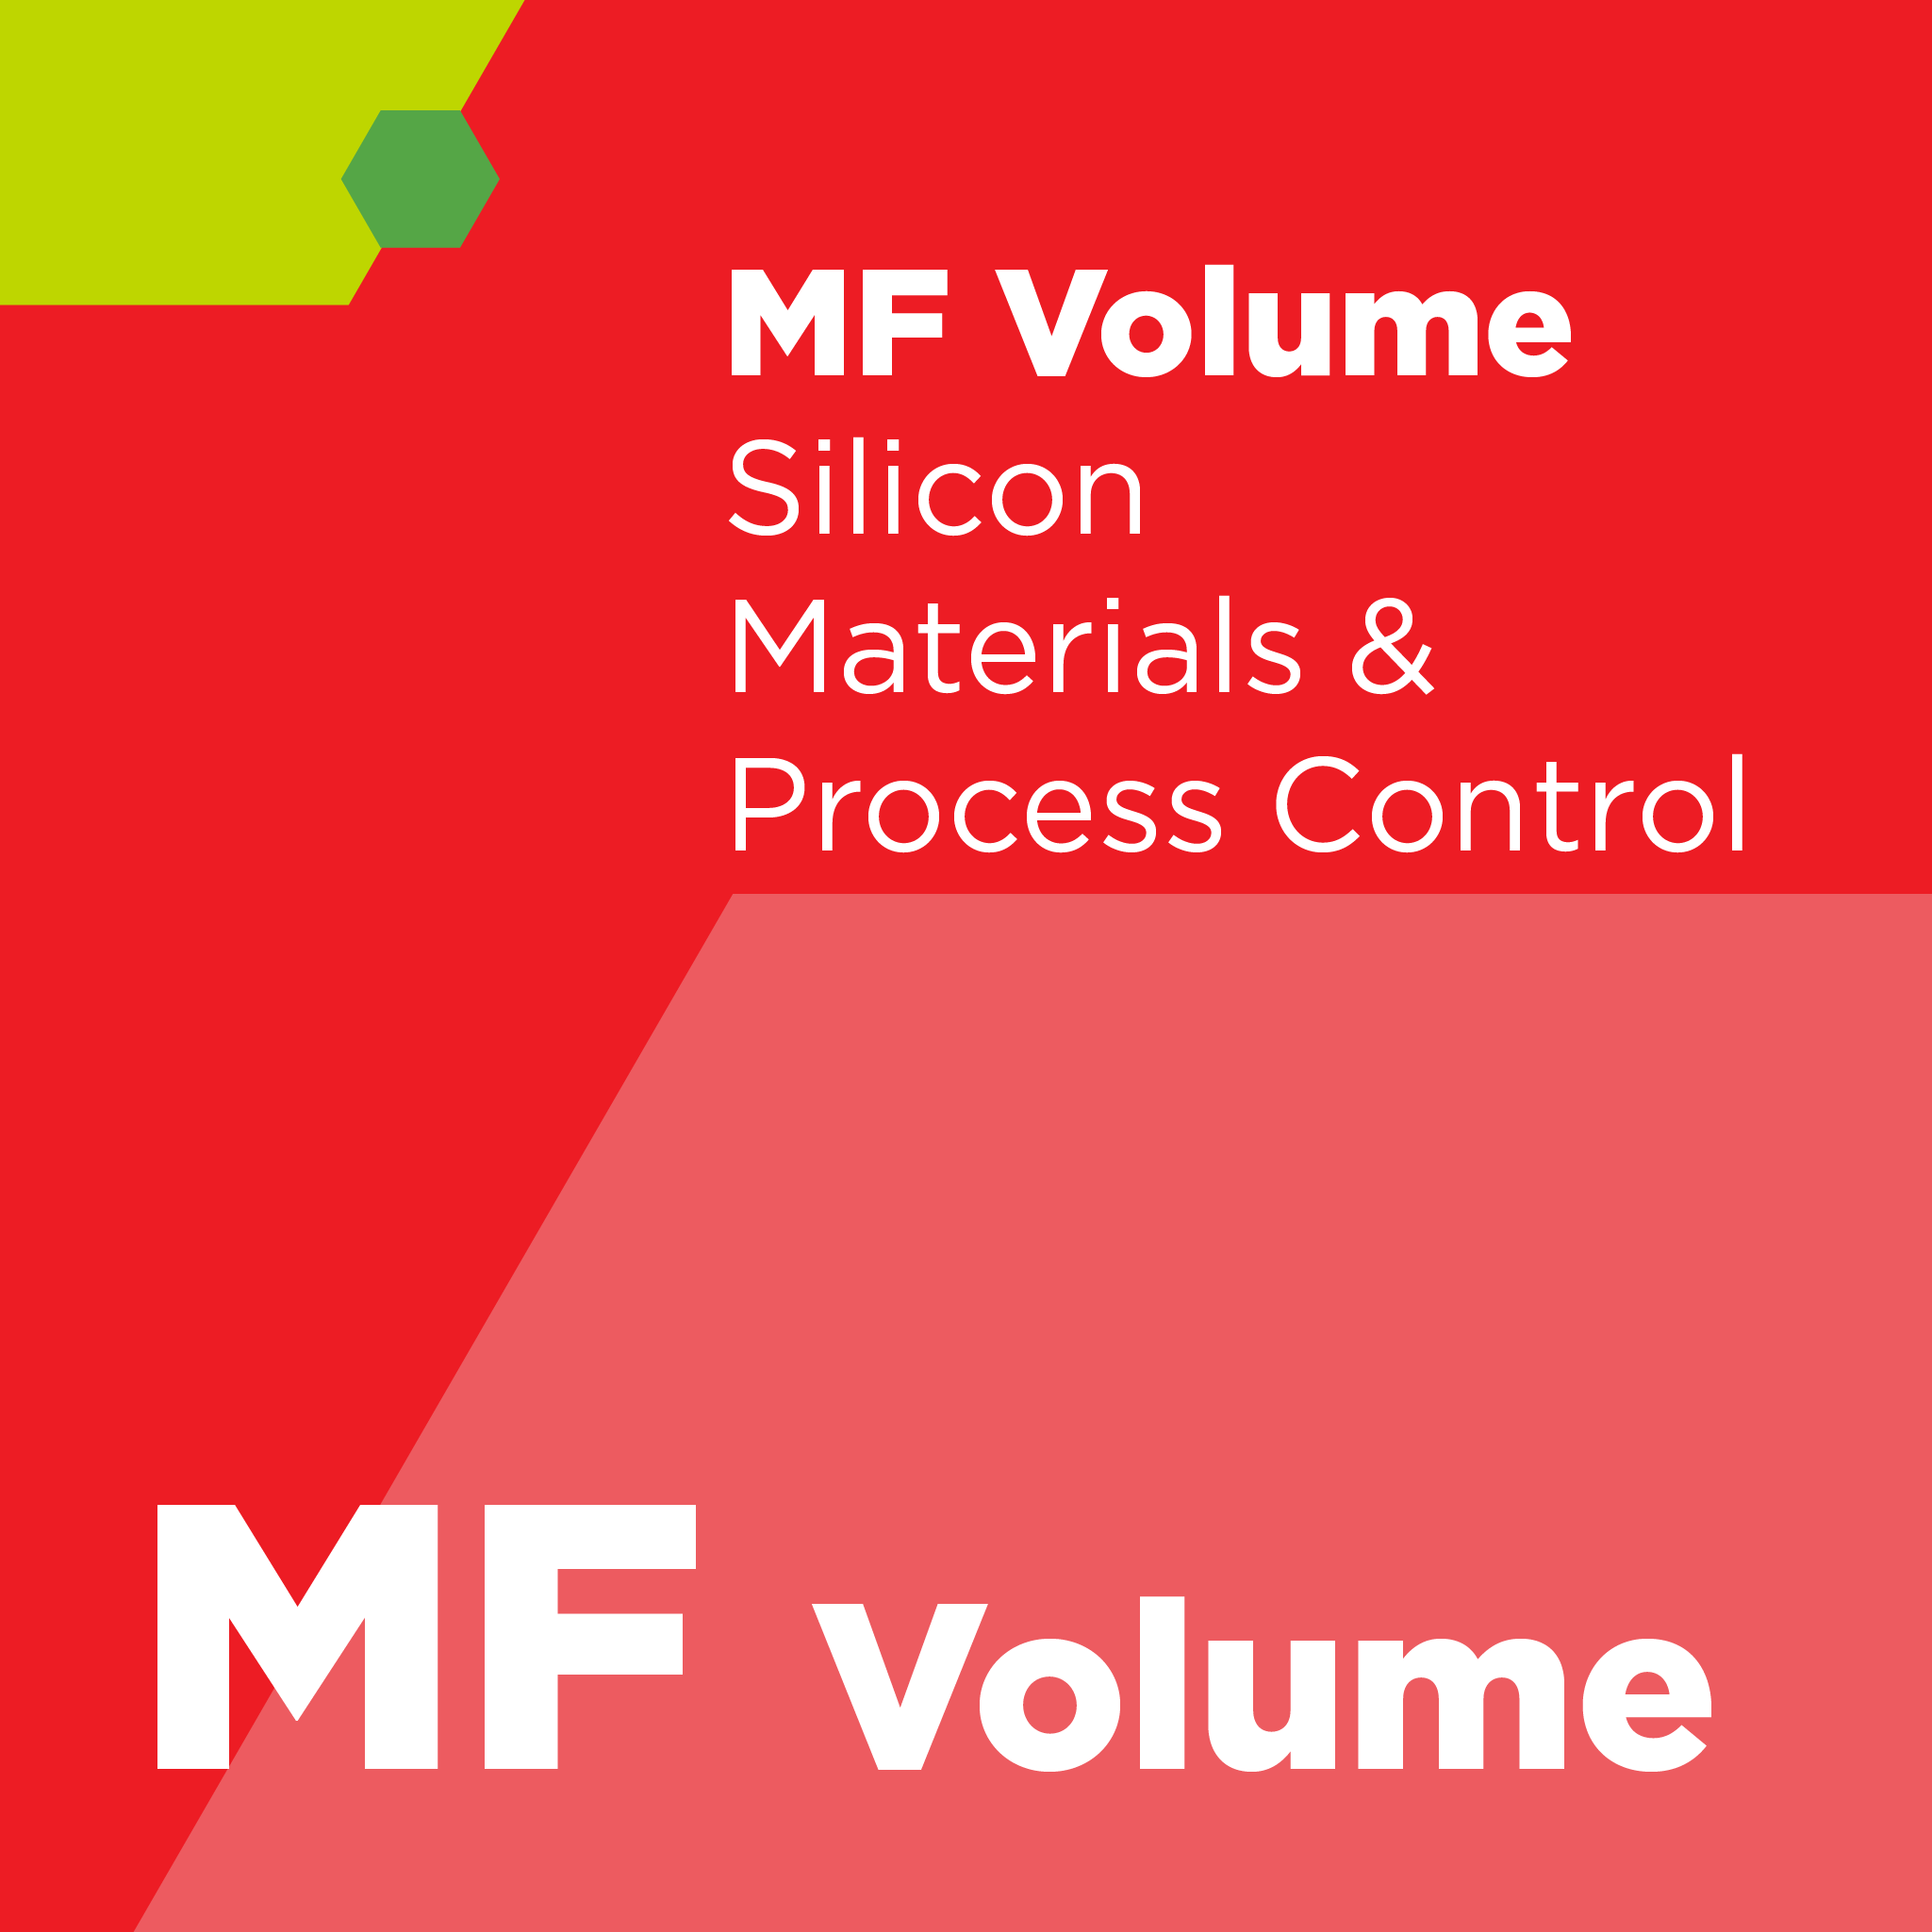 MF015400 - SEMI MF154 - Guide for Identification of Structures and Contaminants Seen on Specular Silicon Surfaces